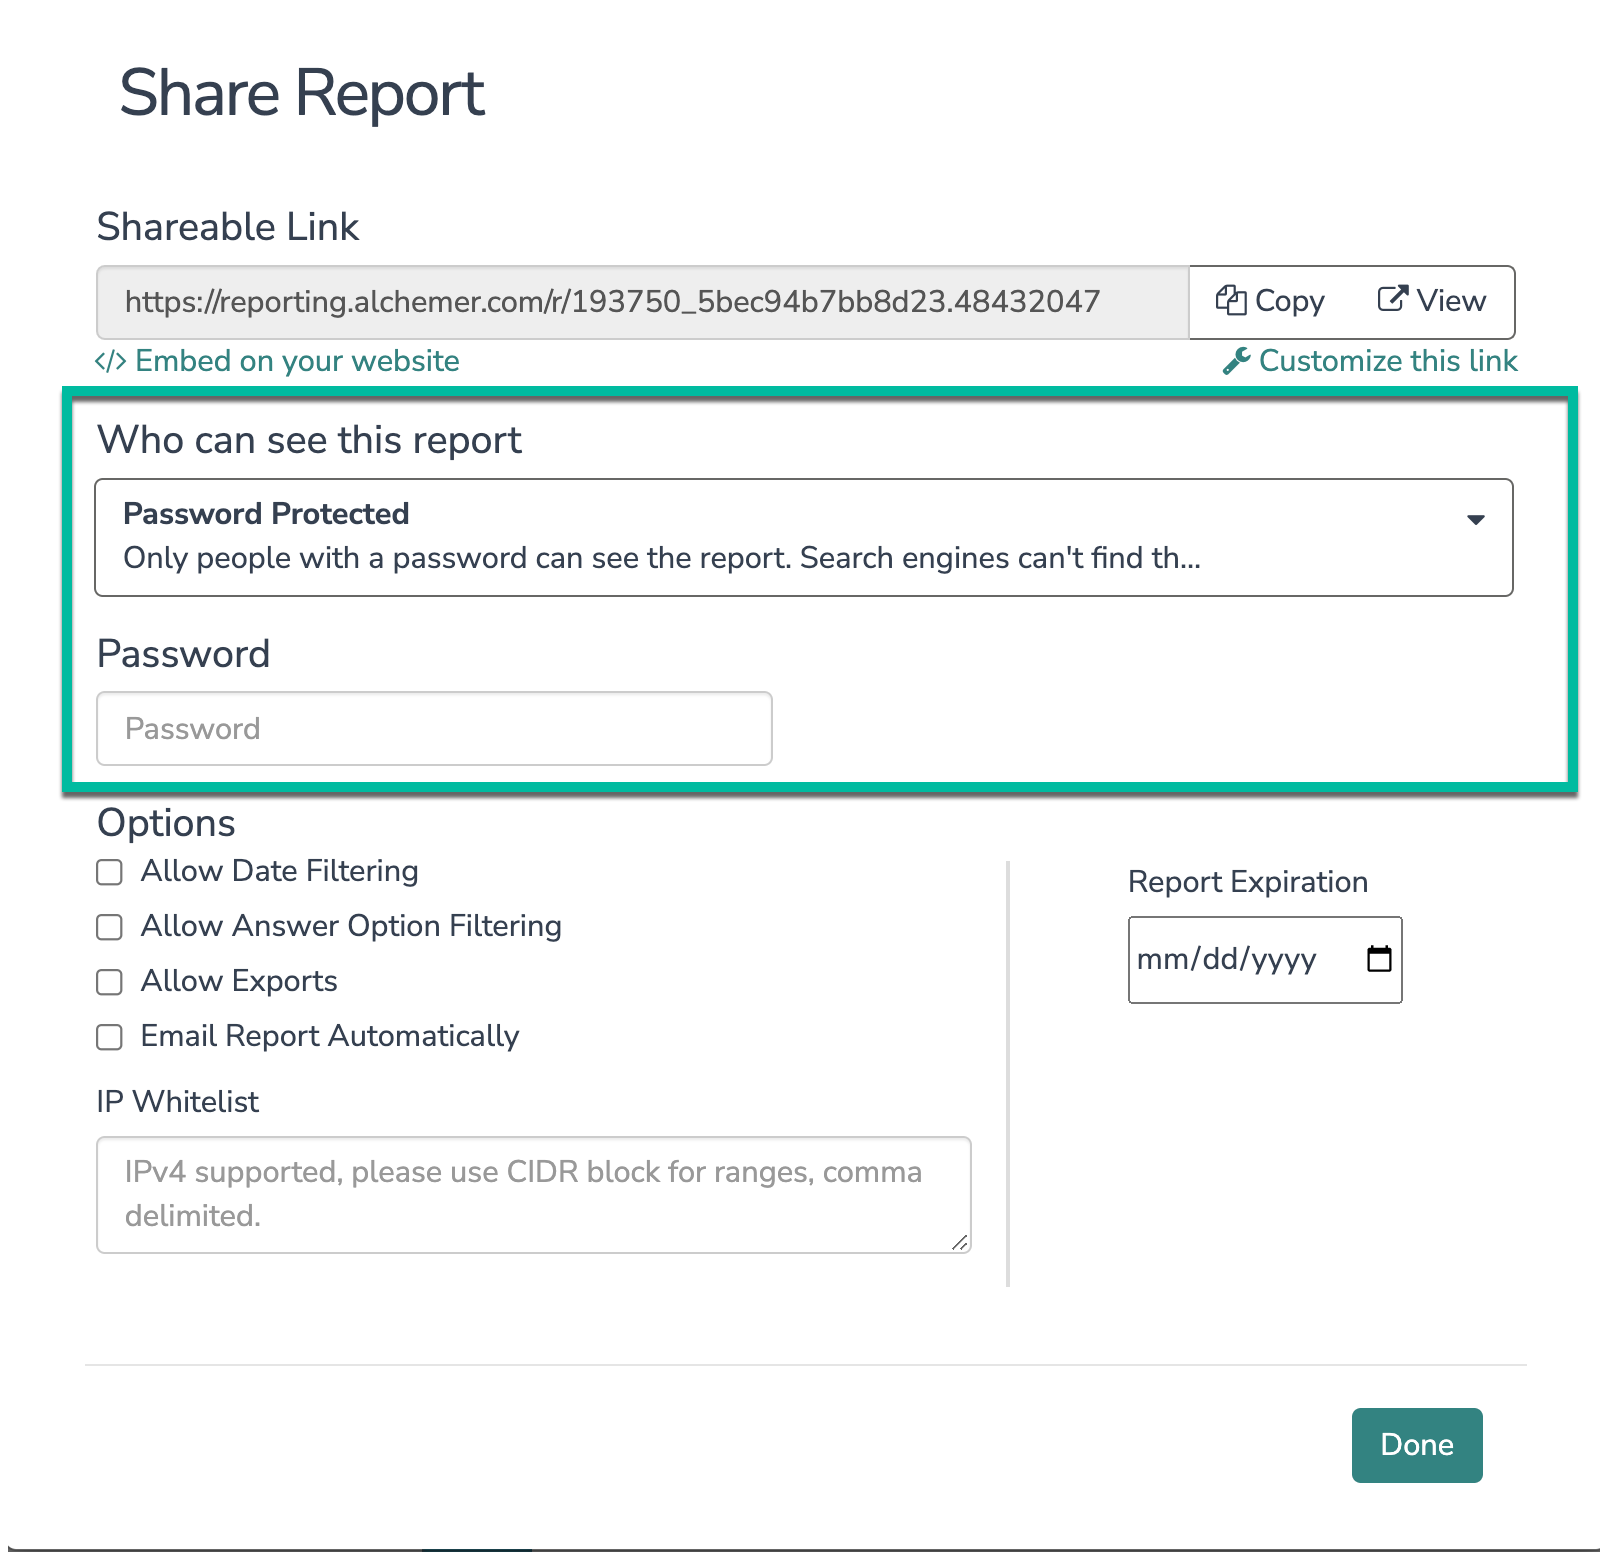 Share Report with Password Protection